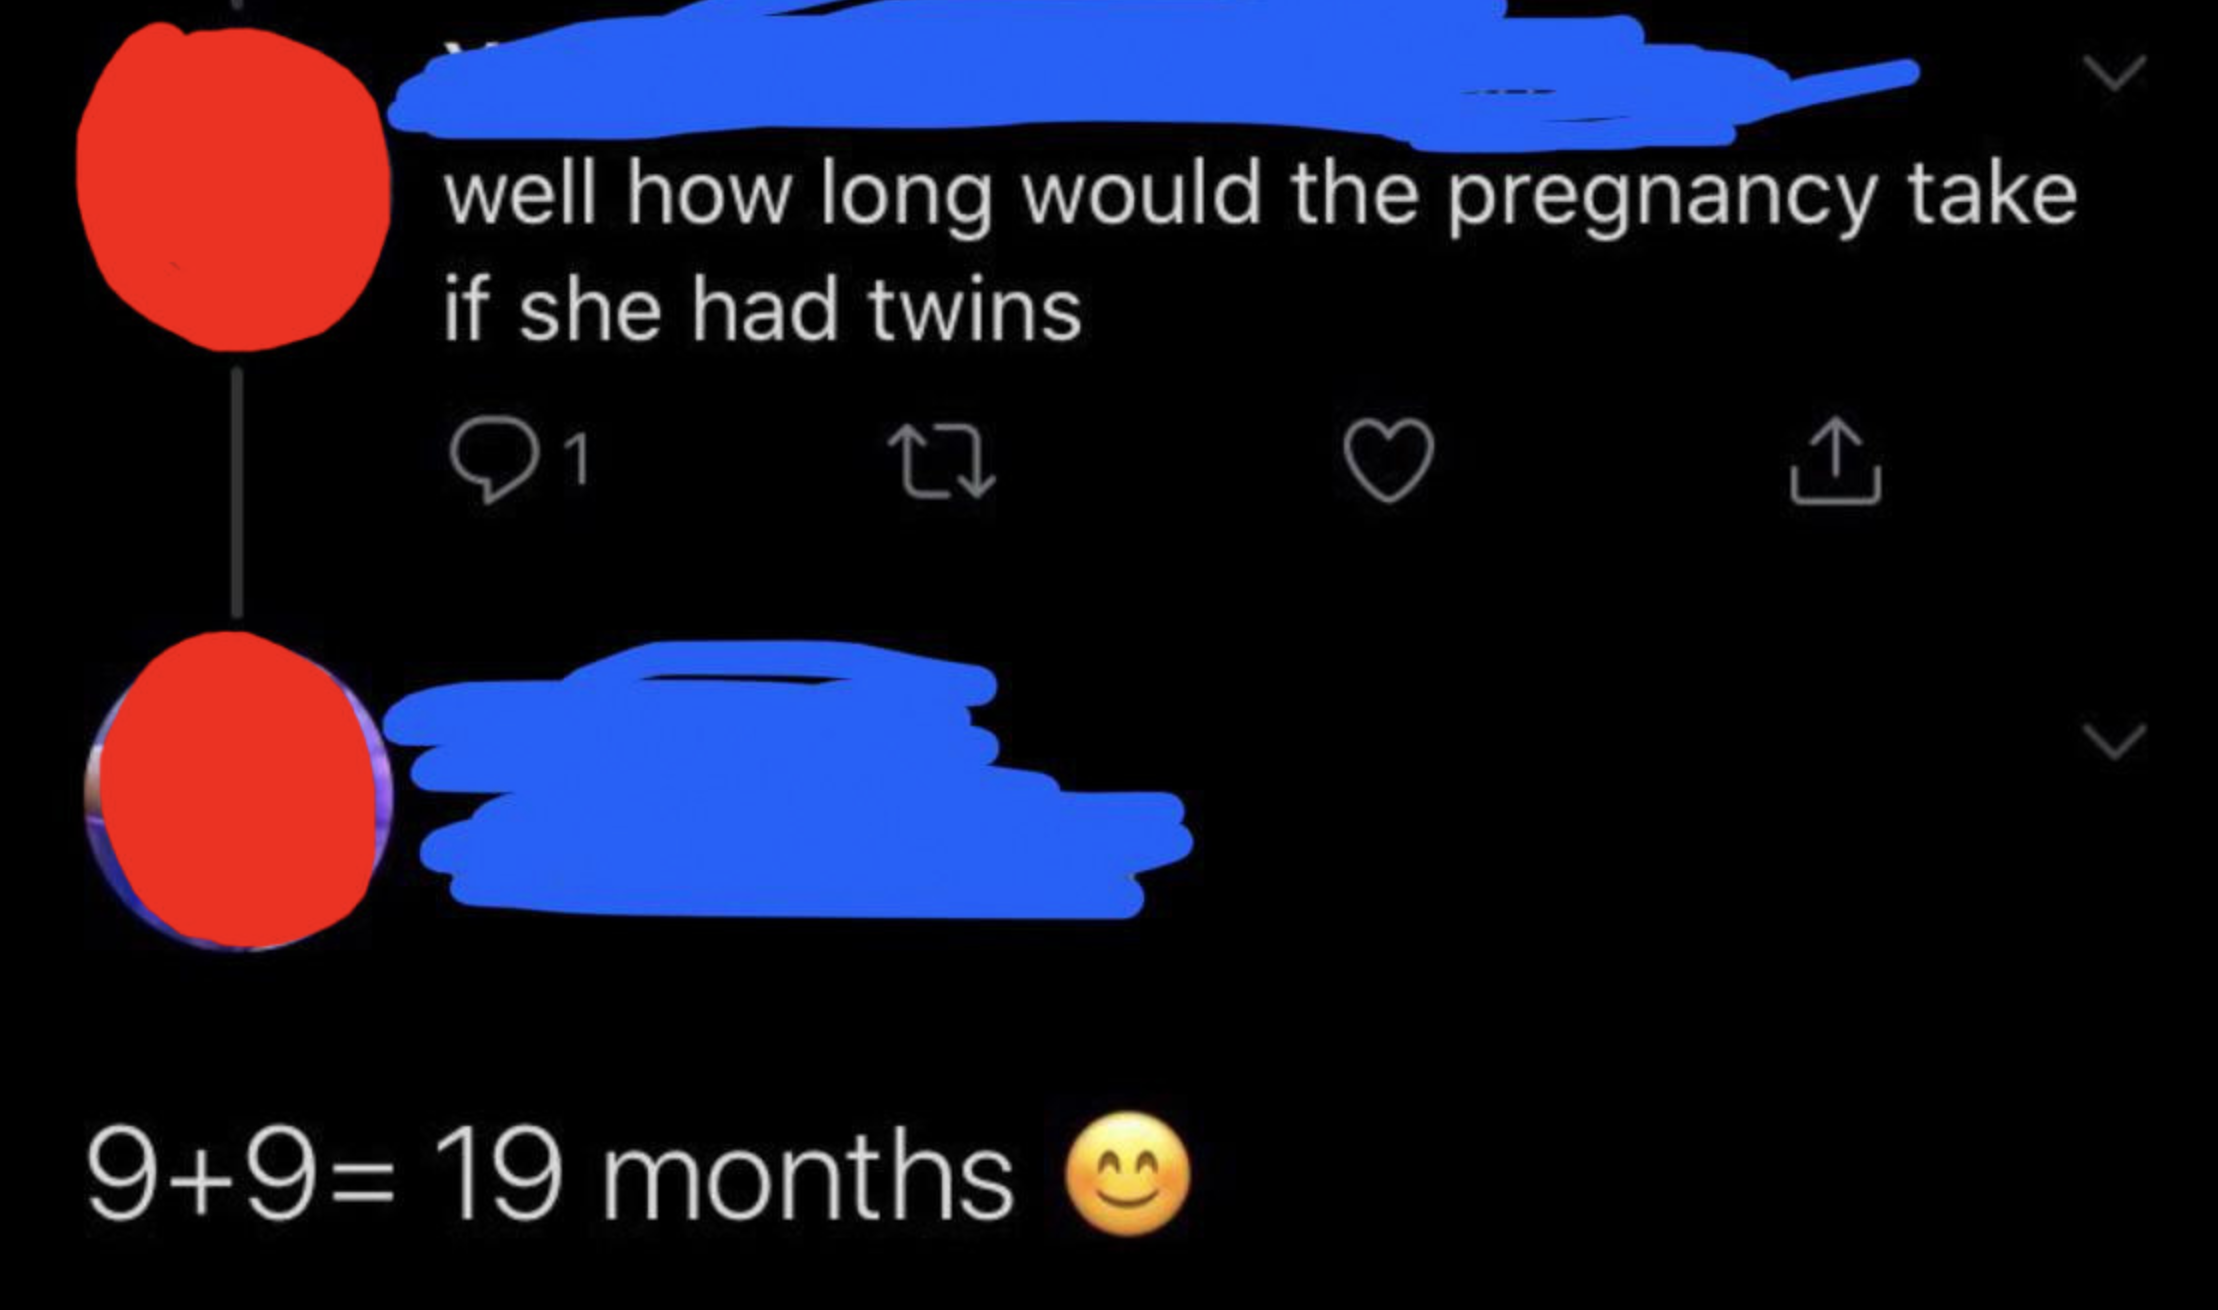 tweet of someone thinking babies are born after 19 months